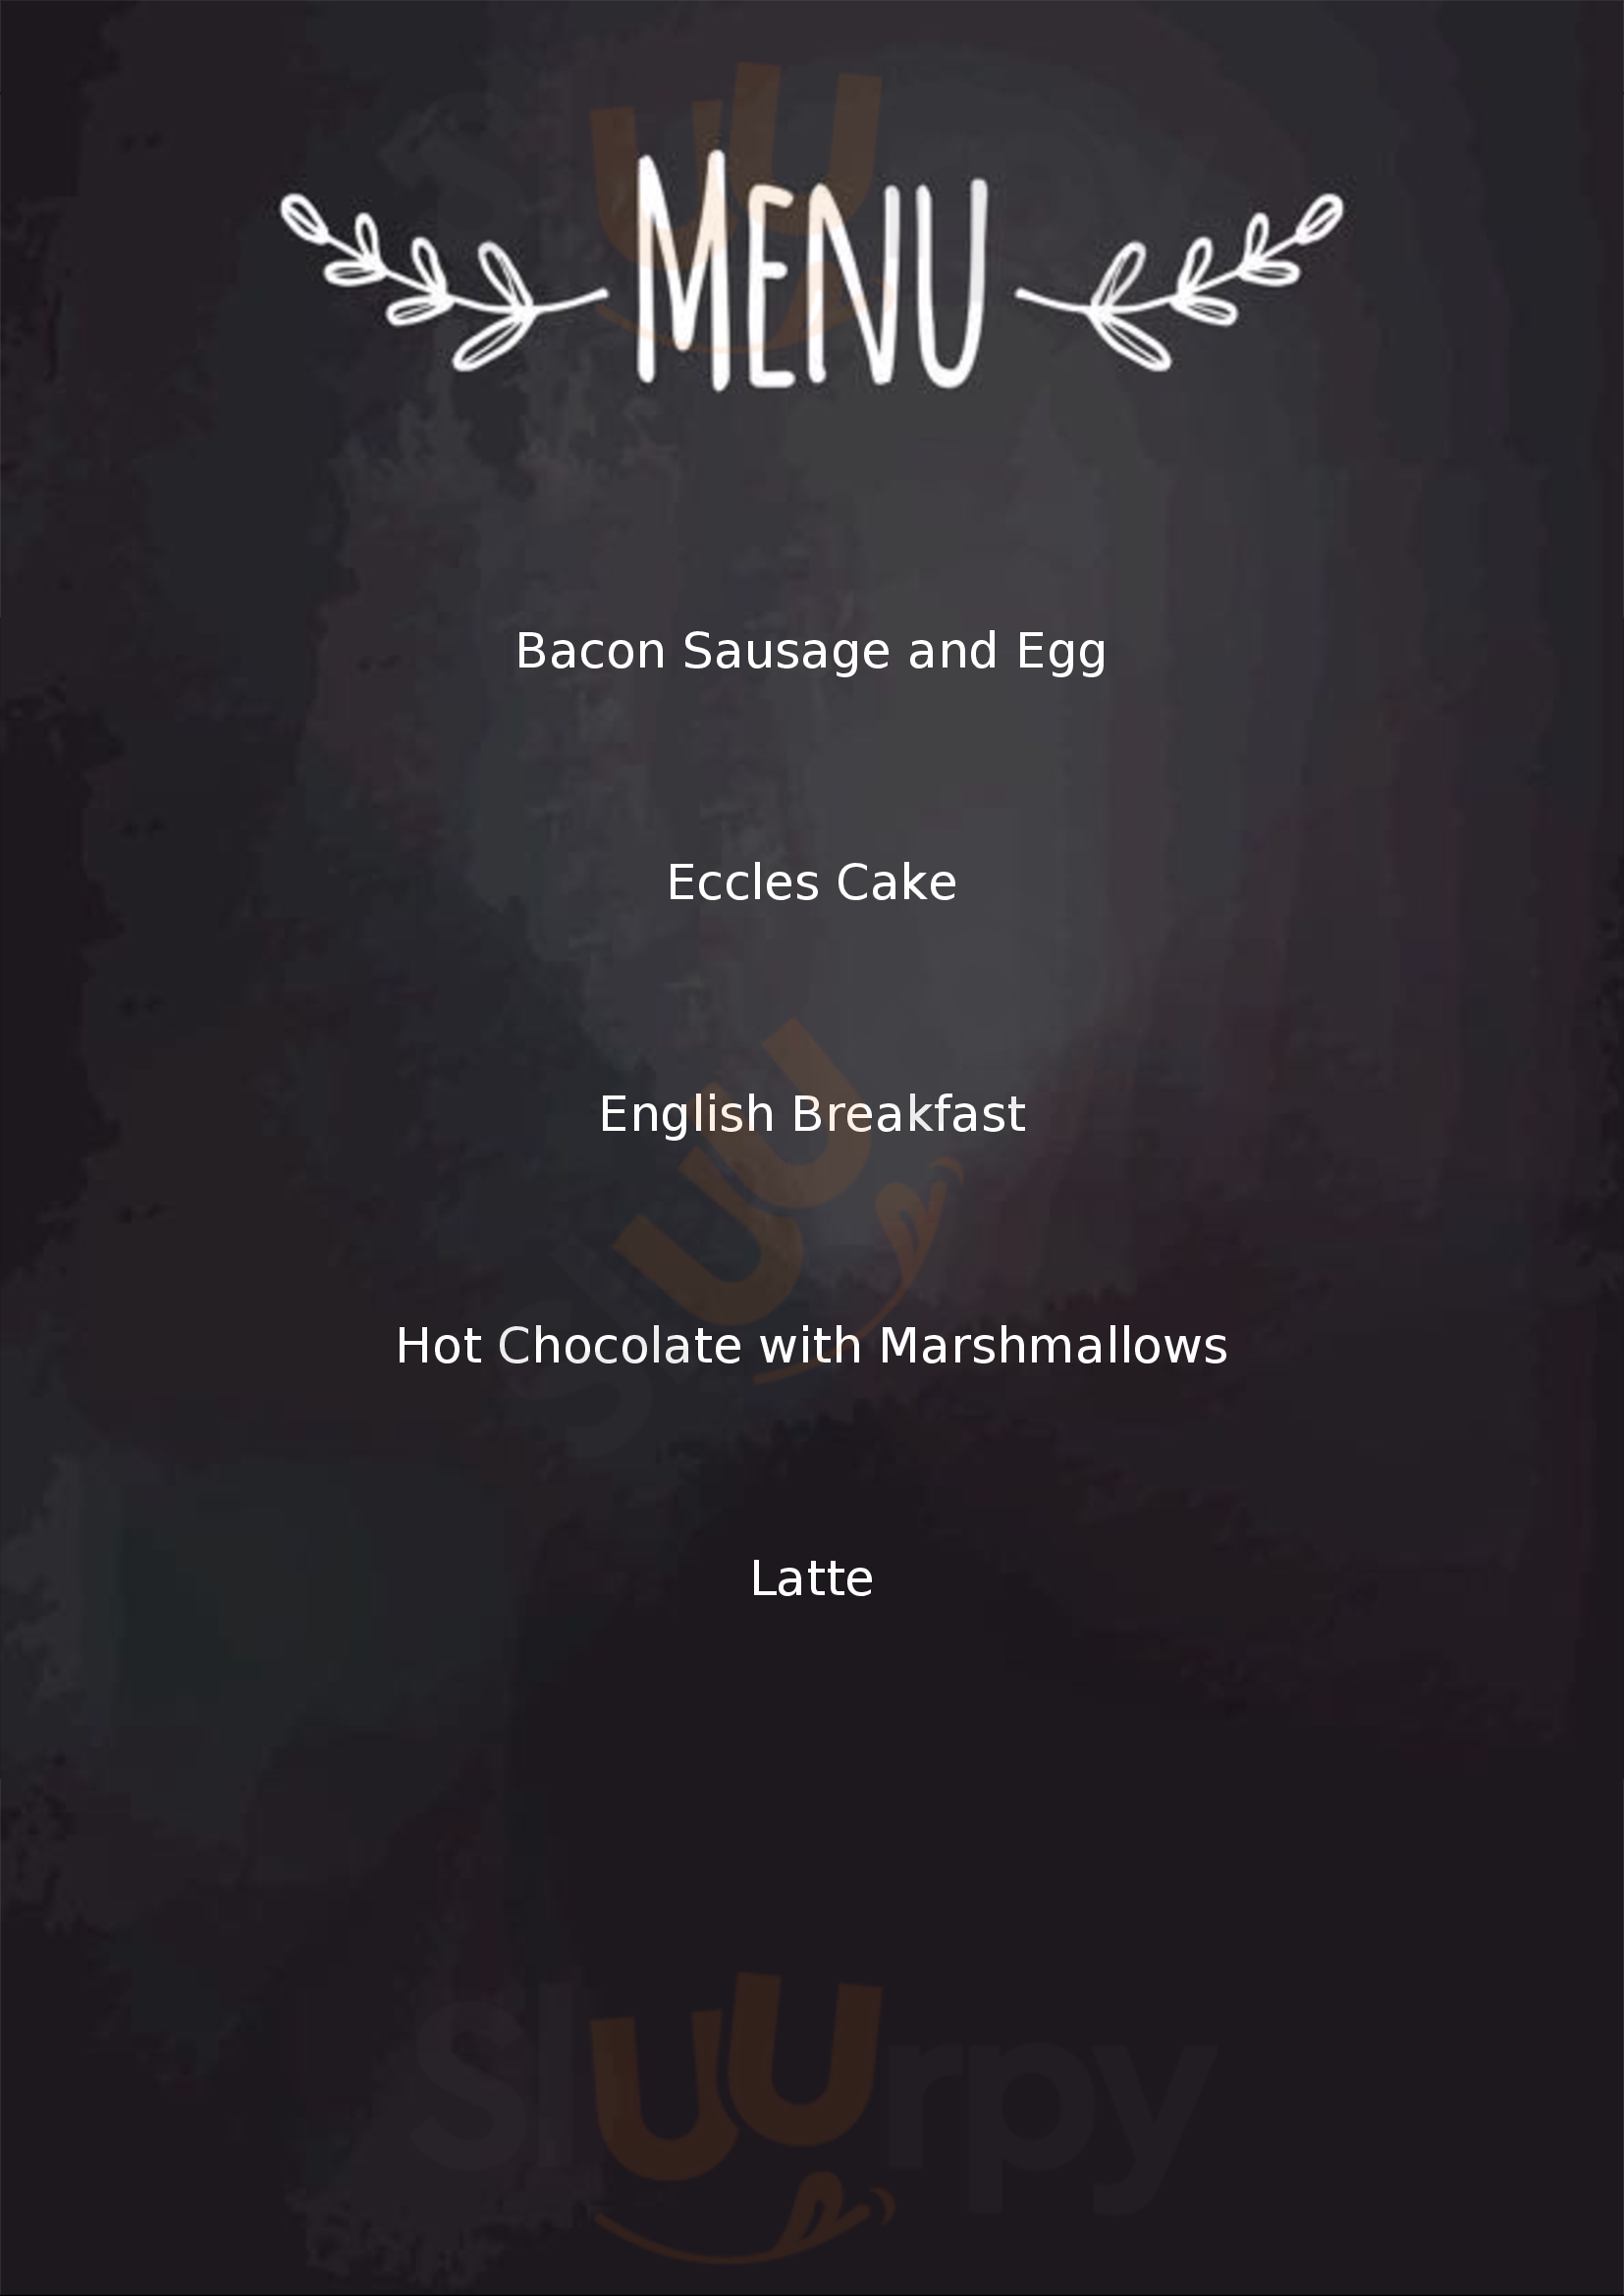 The Cowshed Cafe Henley in Arden Menu - 1